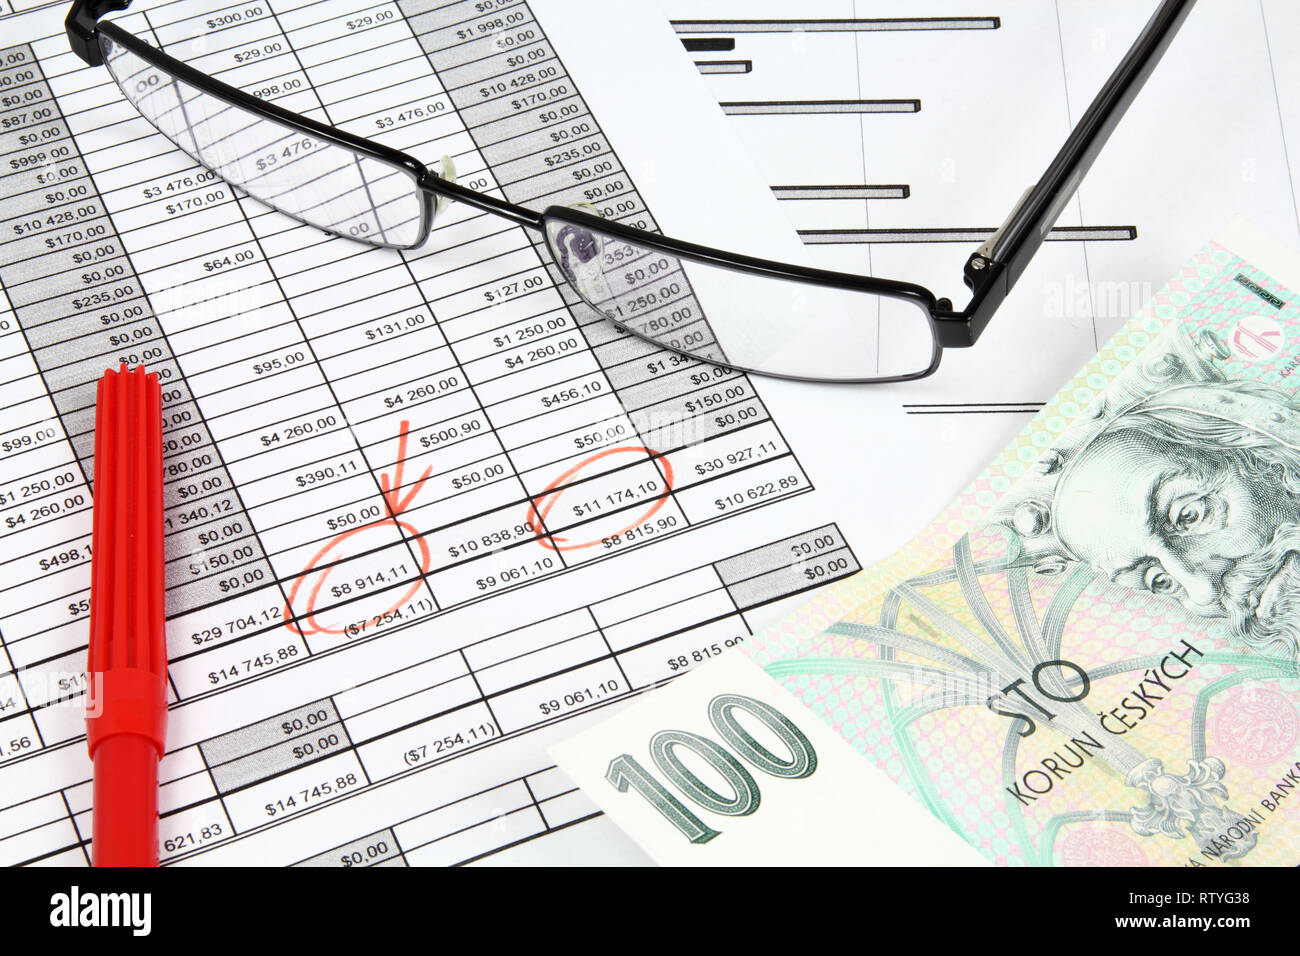 Business composition. Financial analysis - income statement, red marker, glasses and Czech koruna money. Stock Photo